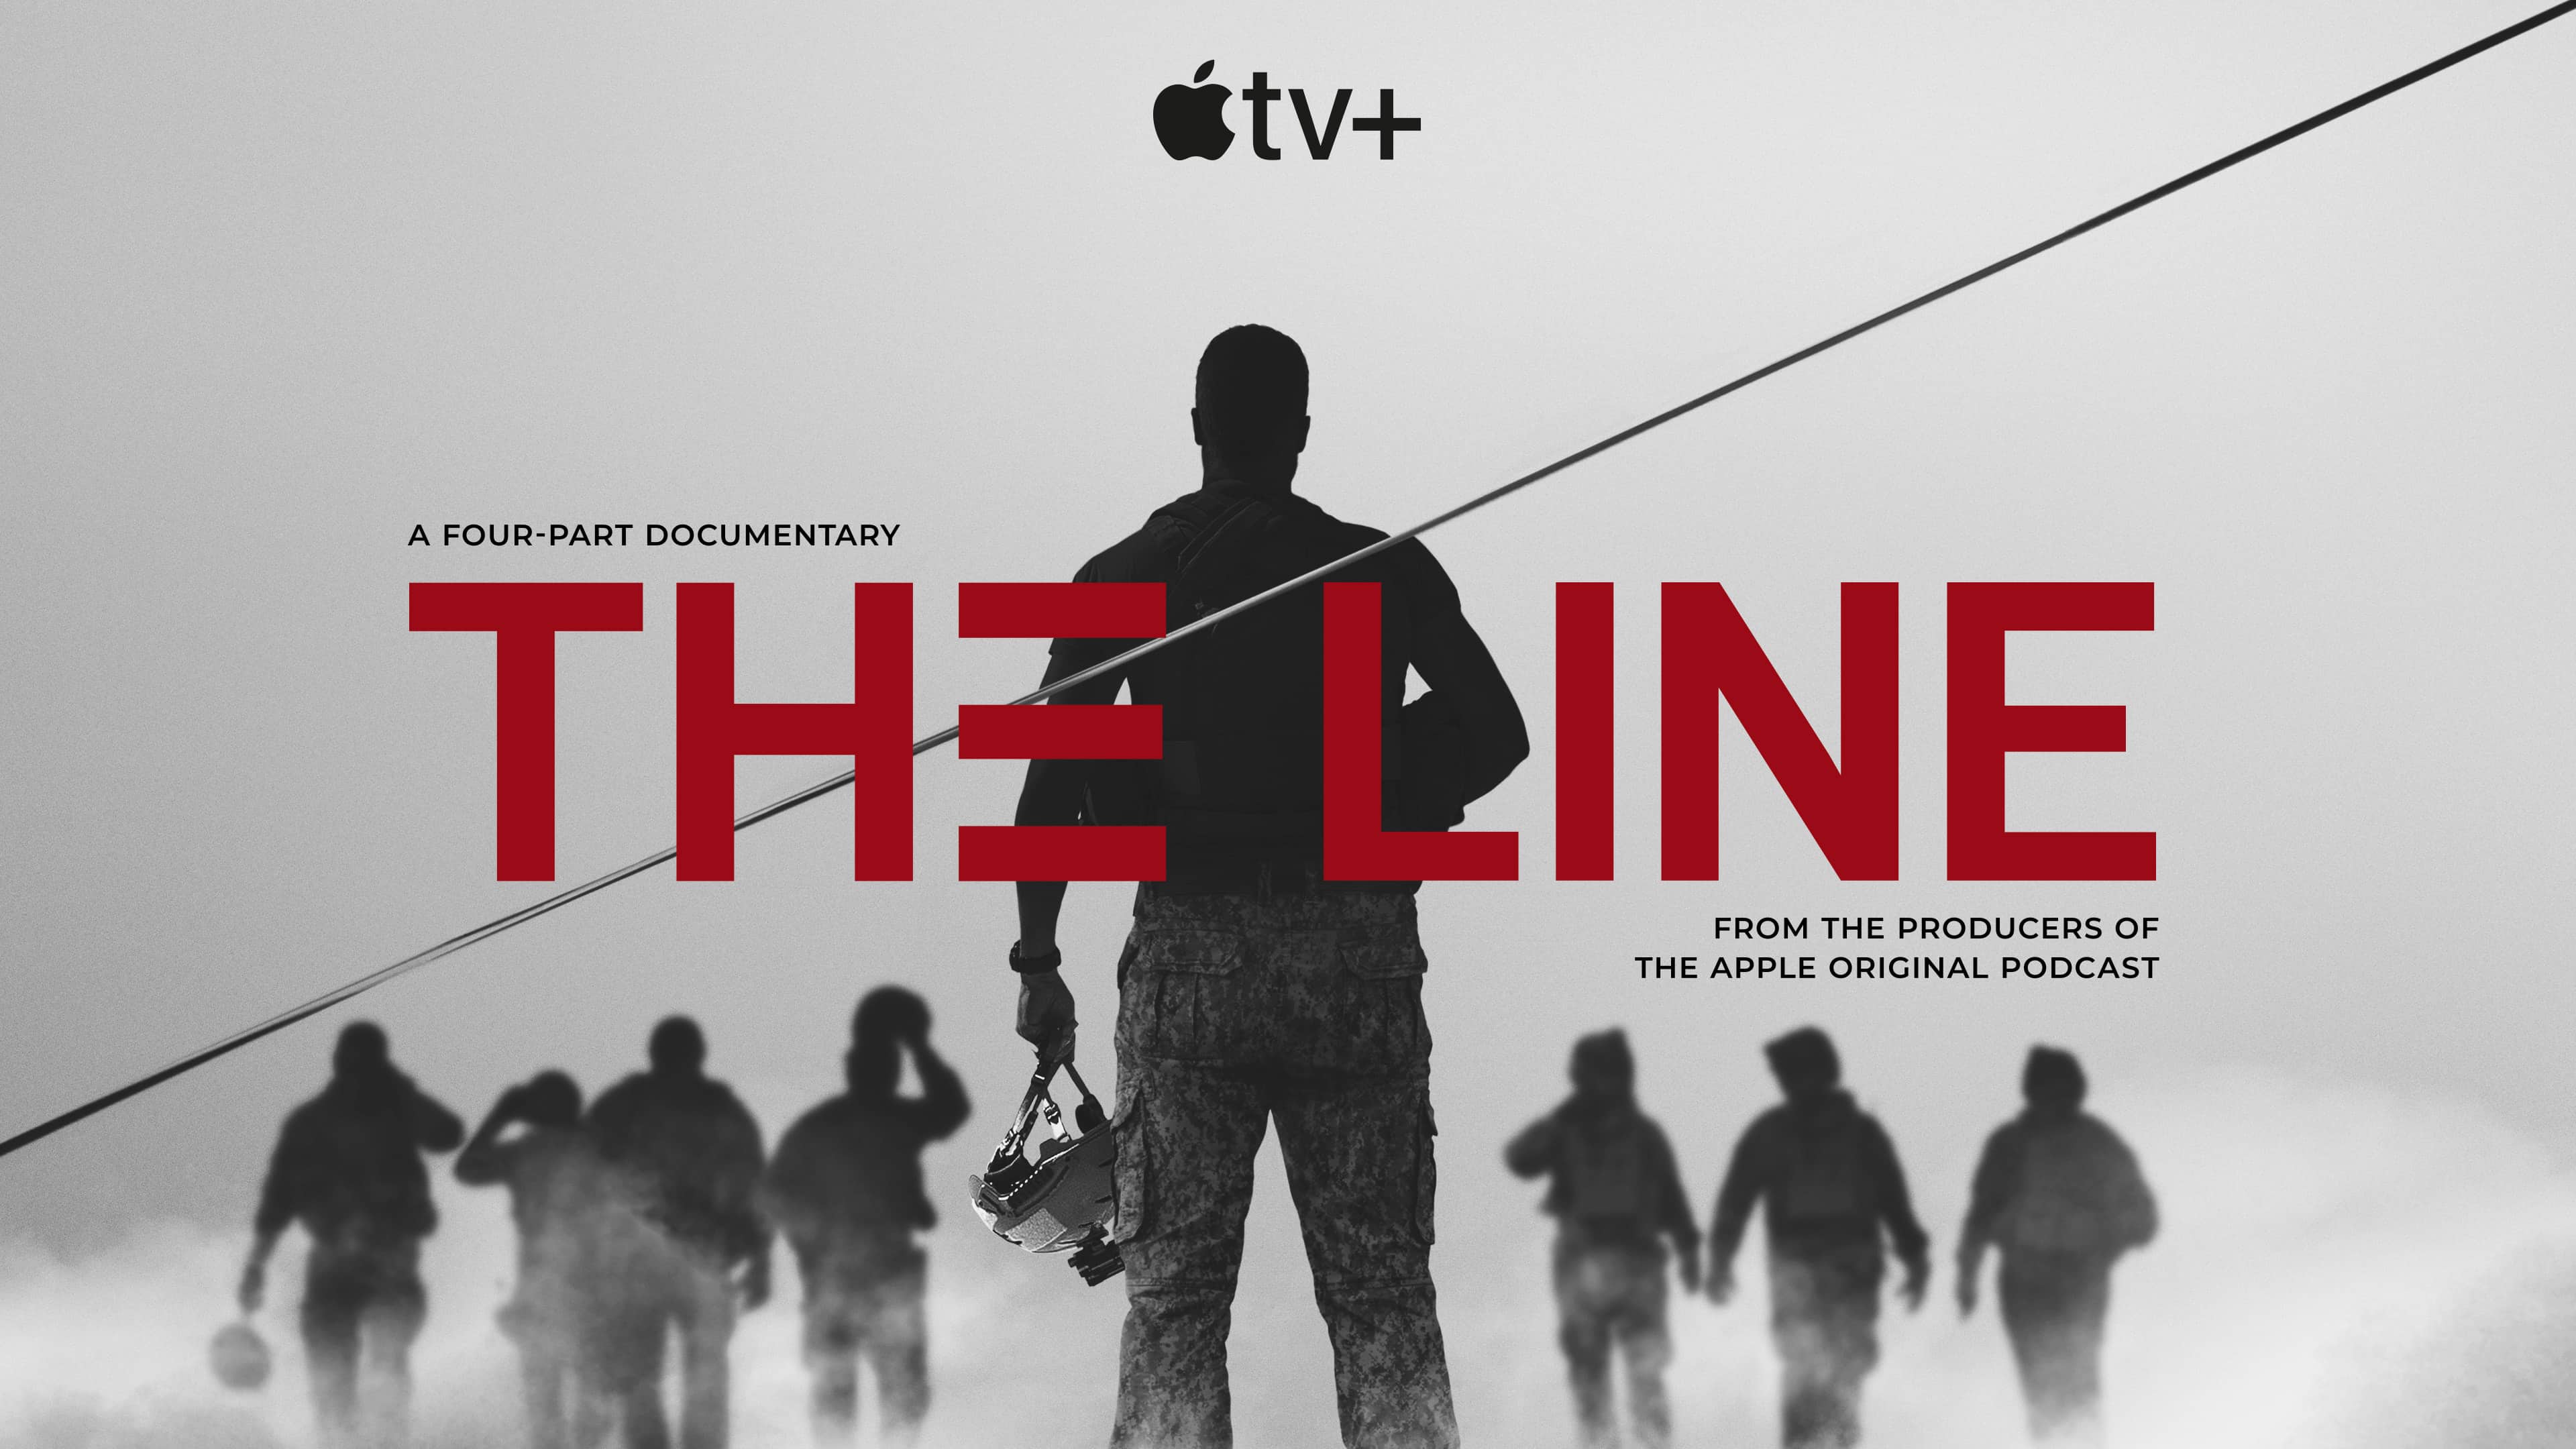 Poster artwork for the Apple TV+ documentary called "The Line"